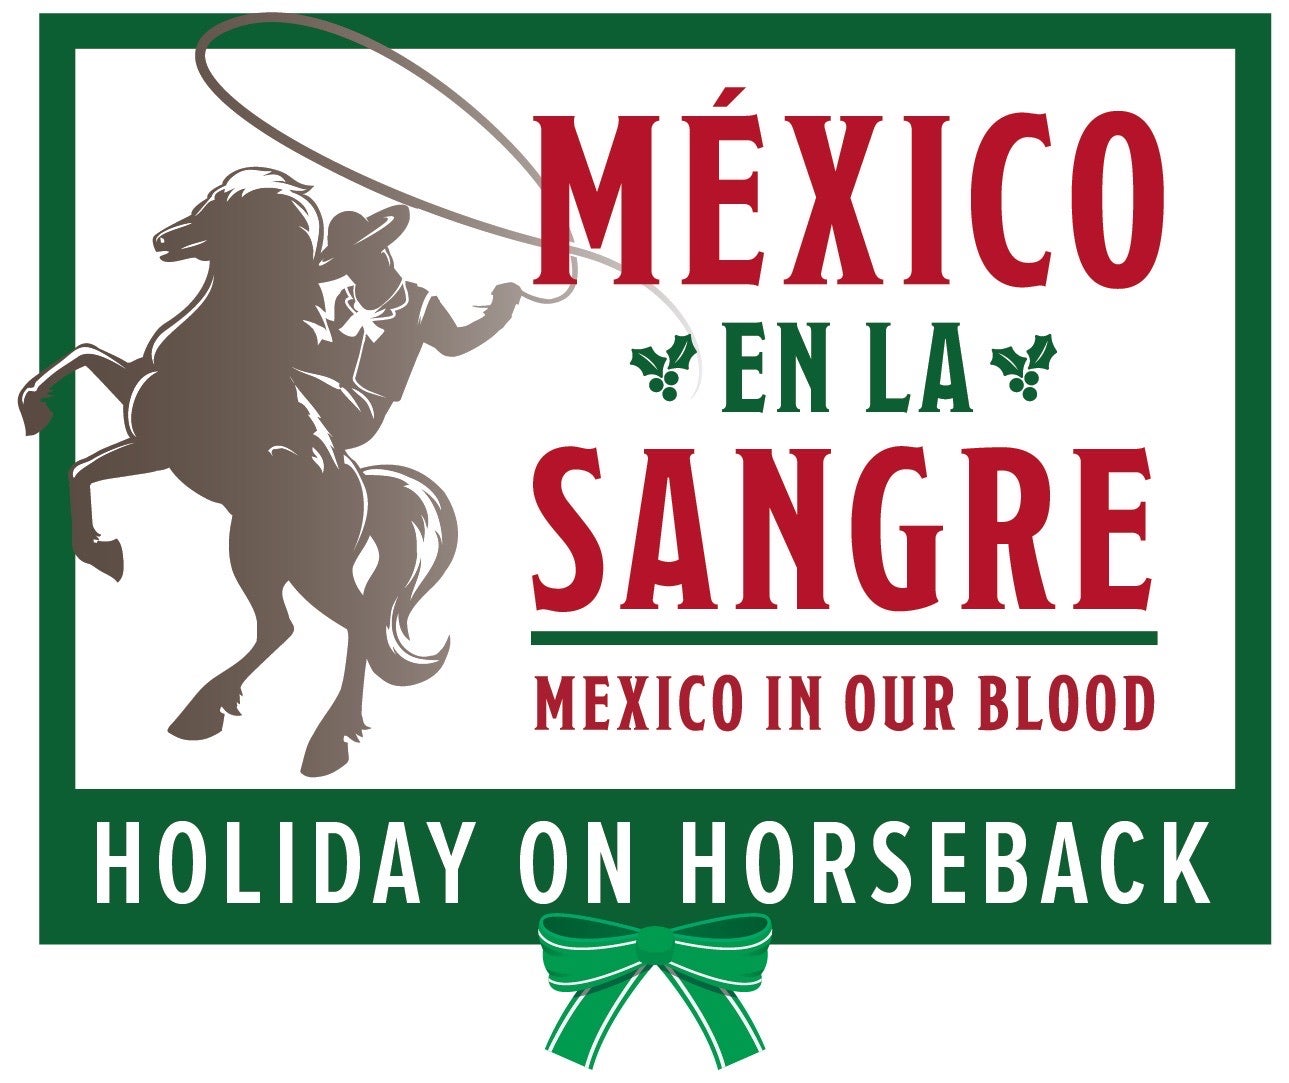 Mexico in Our Blood Holiday on Horseback